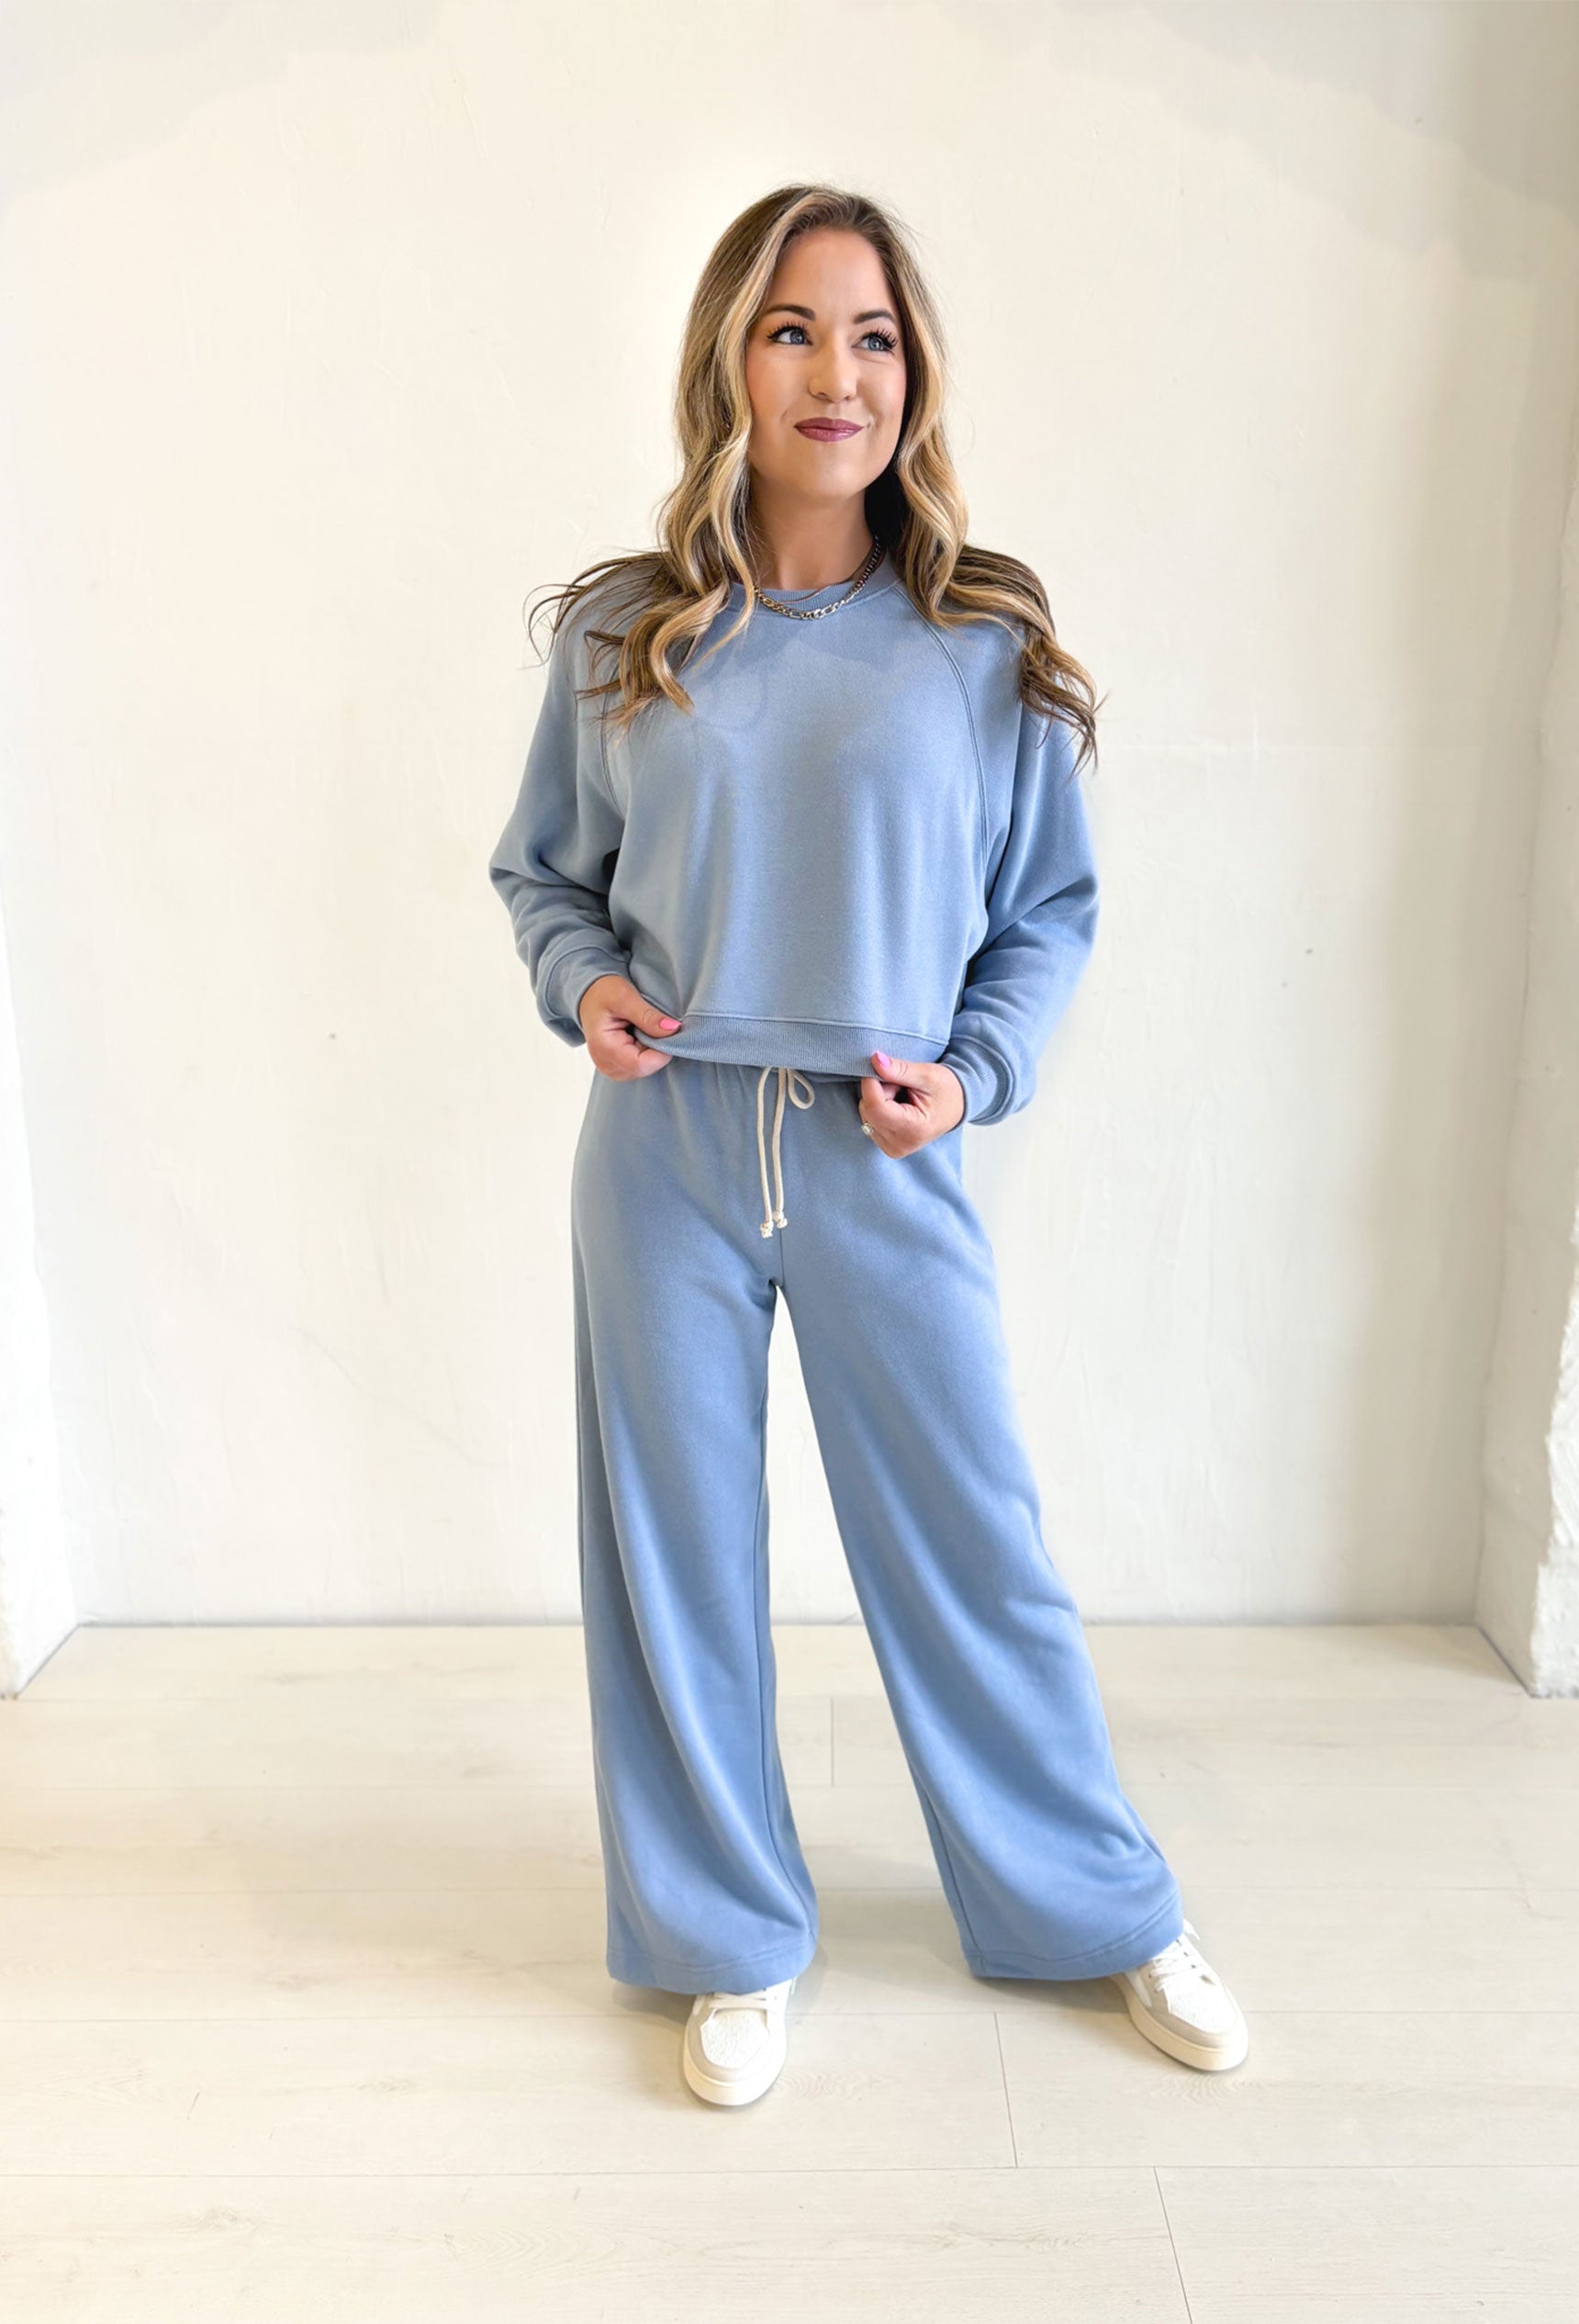 Z SUPPLY Feeling The Moment Sweatpants, light blue wide leg sweatpants with drawstring waist band